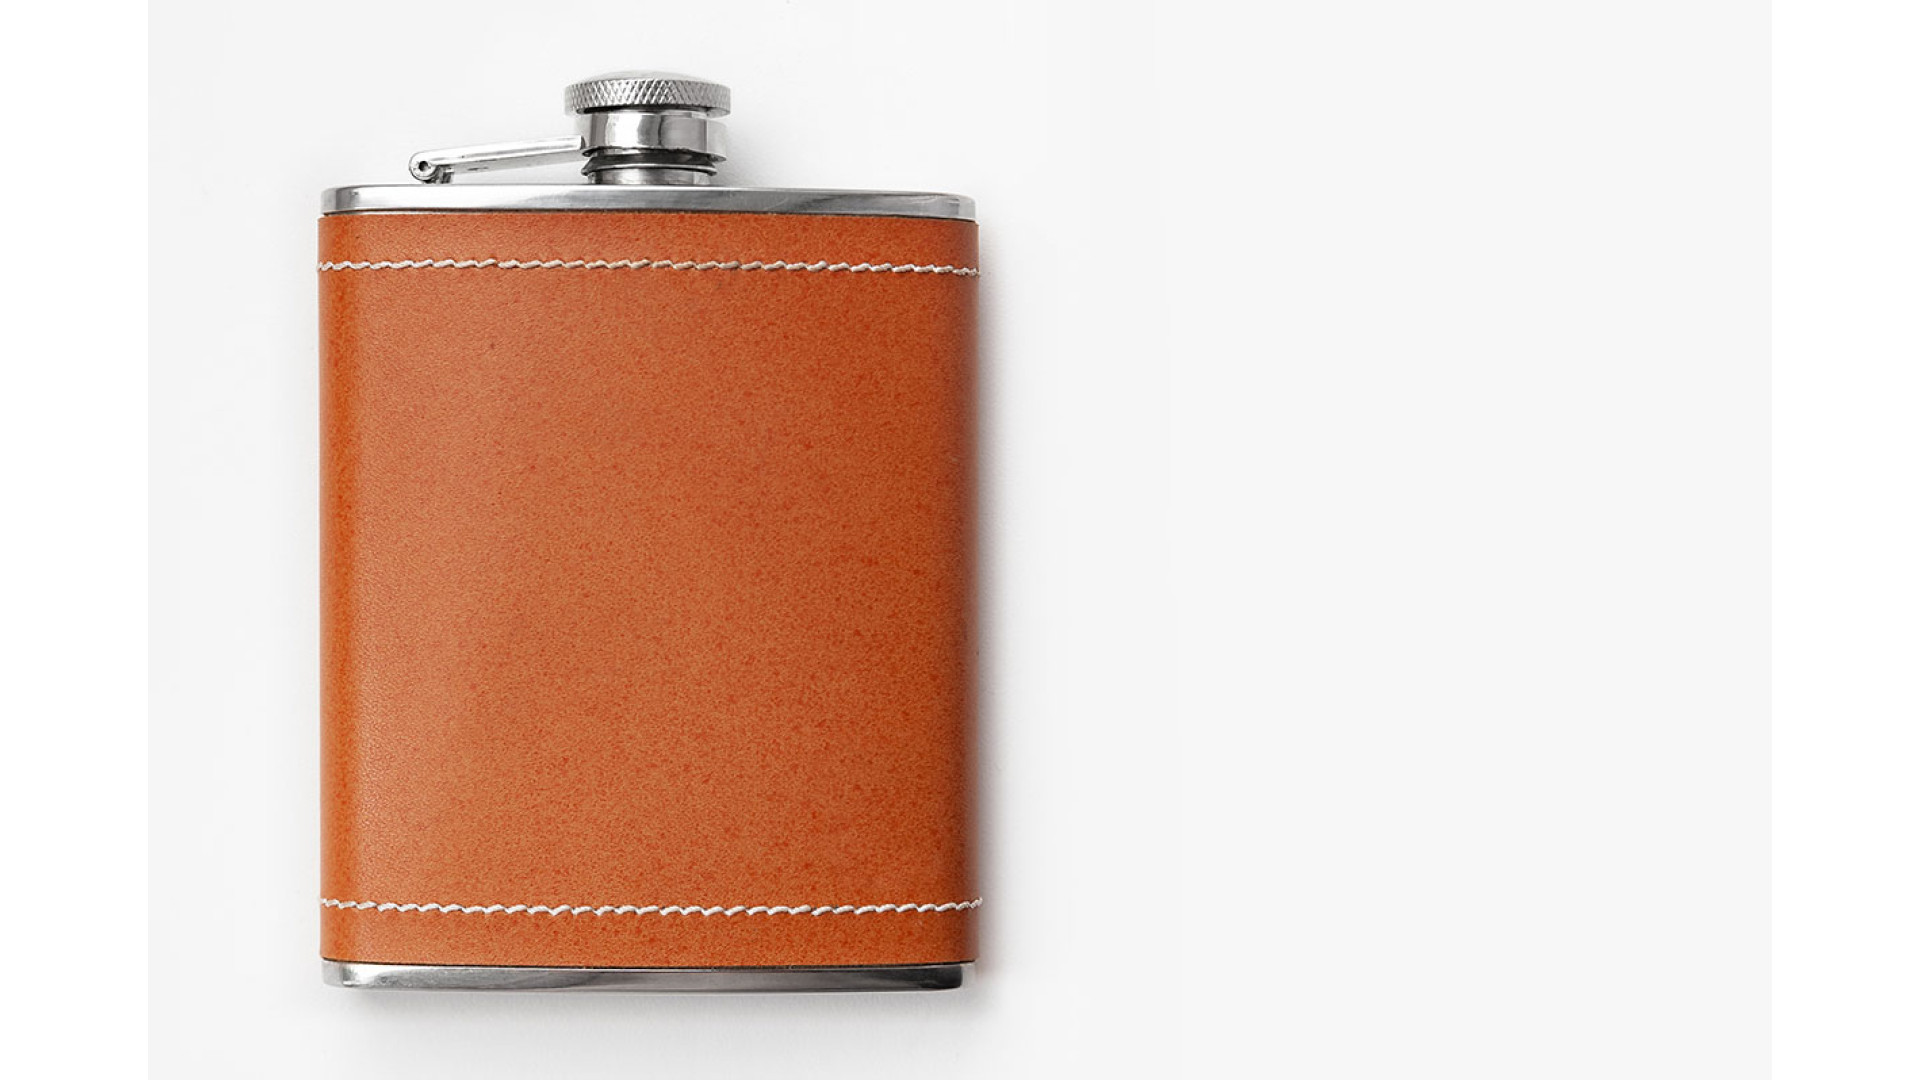 https://www.ckbproducts.com/image/cache/catalog/CKBn/best-leather-hip-flasks-for-drinking-on-the-go-1920x1080.jpg